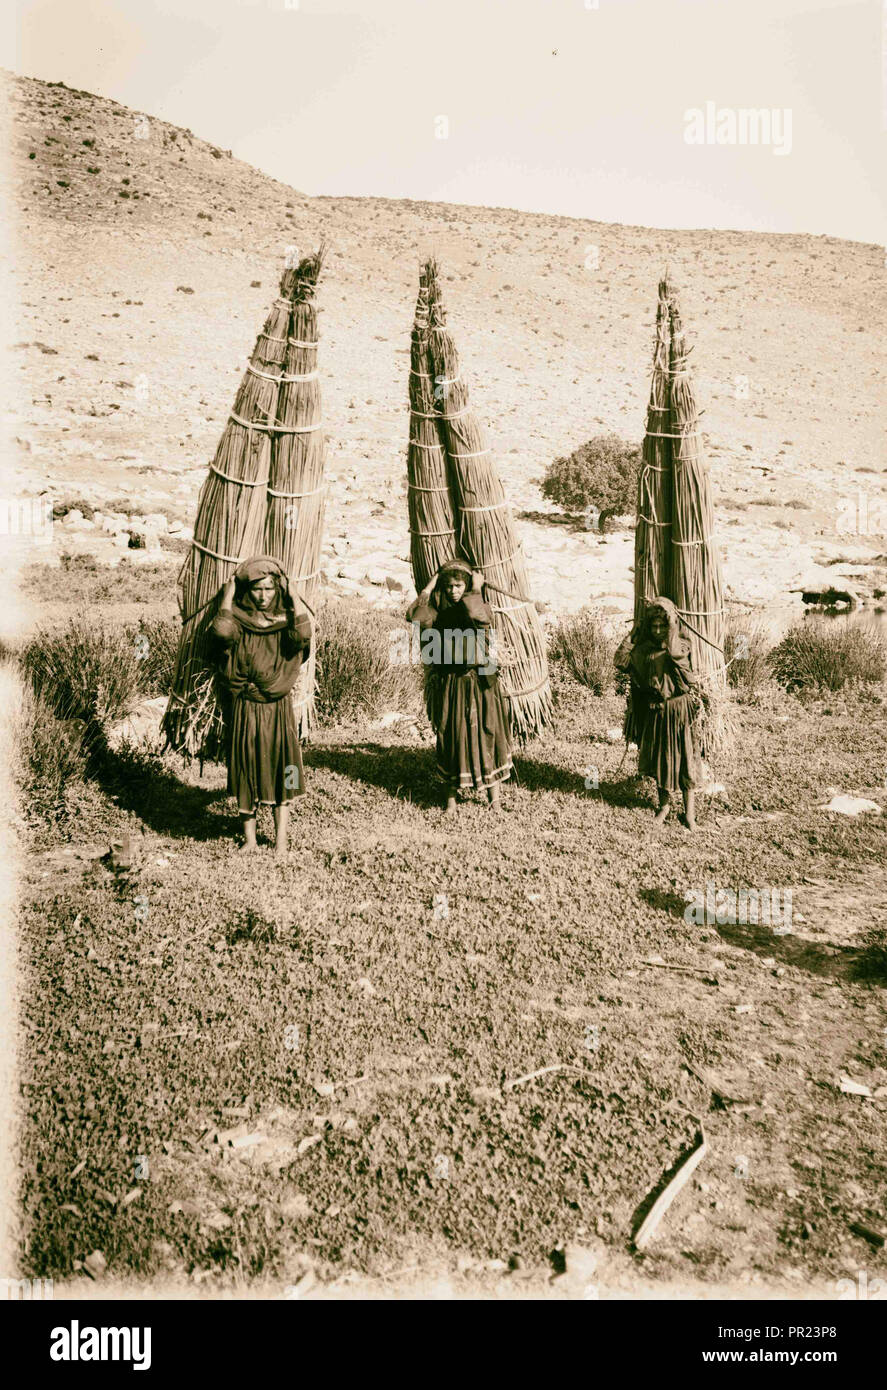 3 Bedouin women carrying (papyrus) bundles on their backs. 1898, Middle East, Israel and/or Palestine Stock Photo